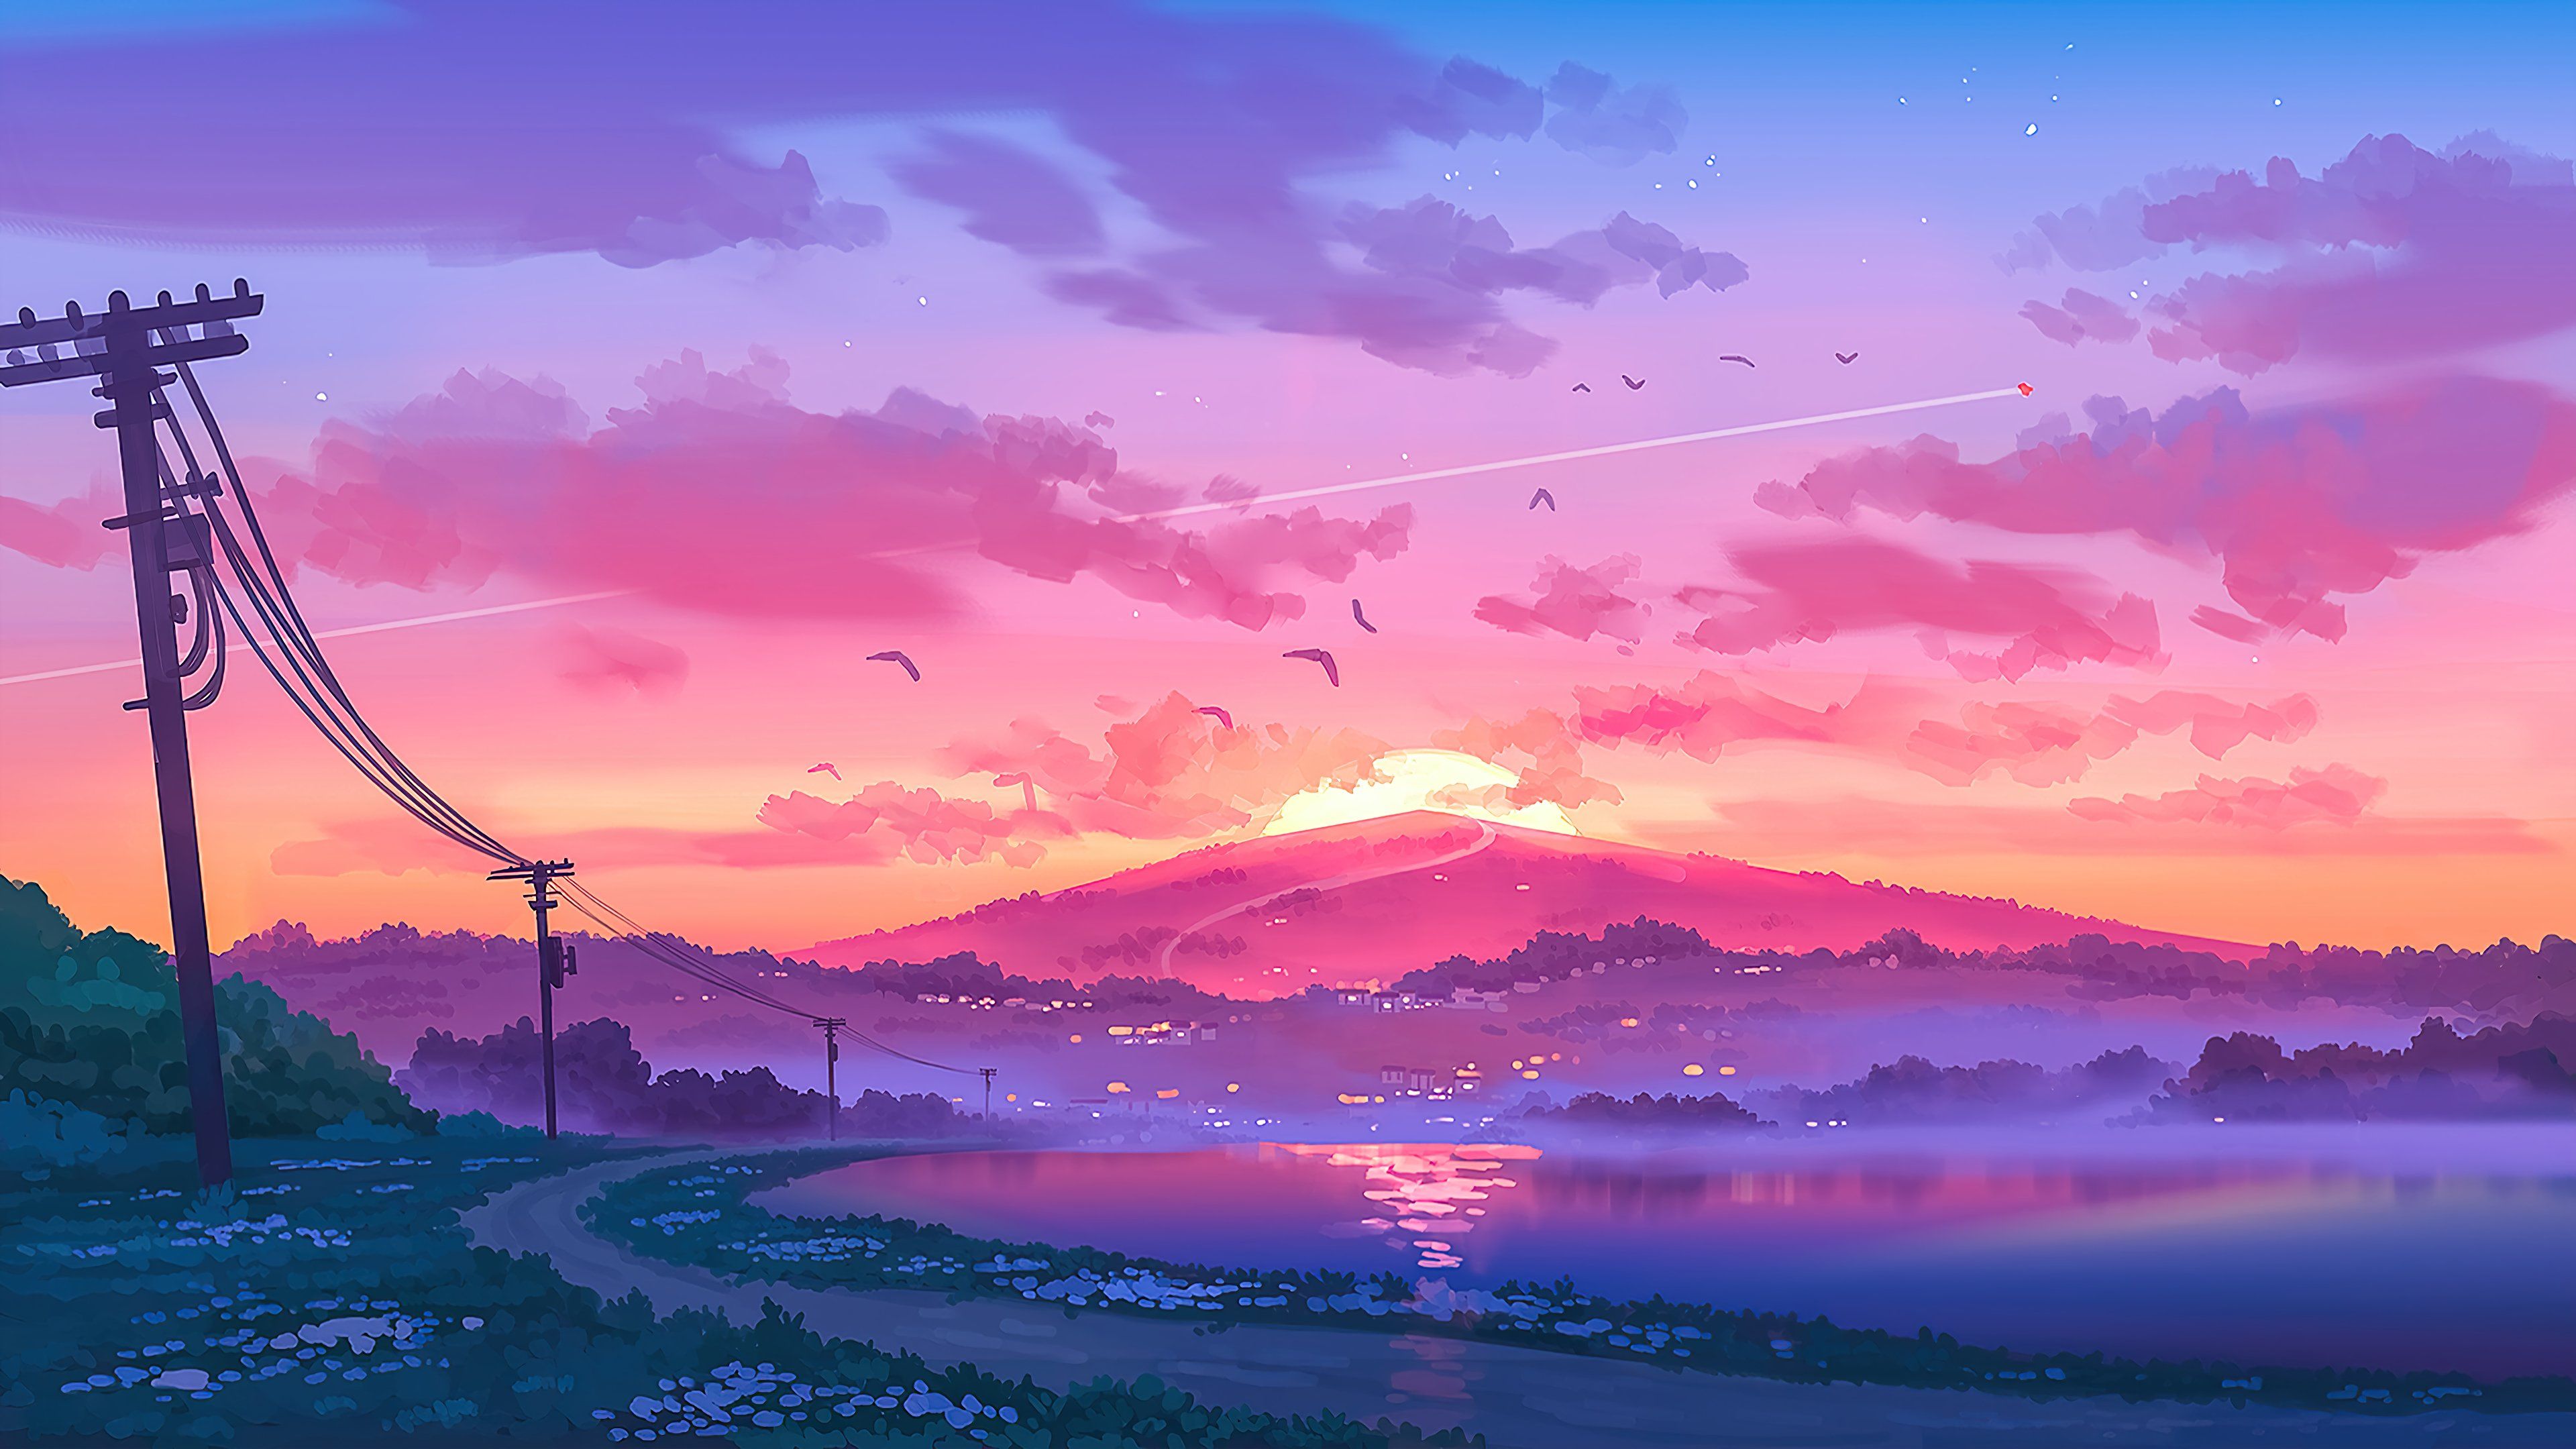 Sunset in the mountains Illustration Wallpaper 4k Ultra HD